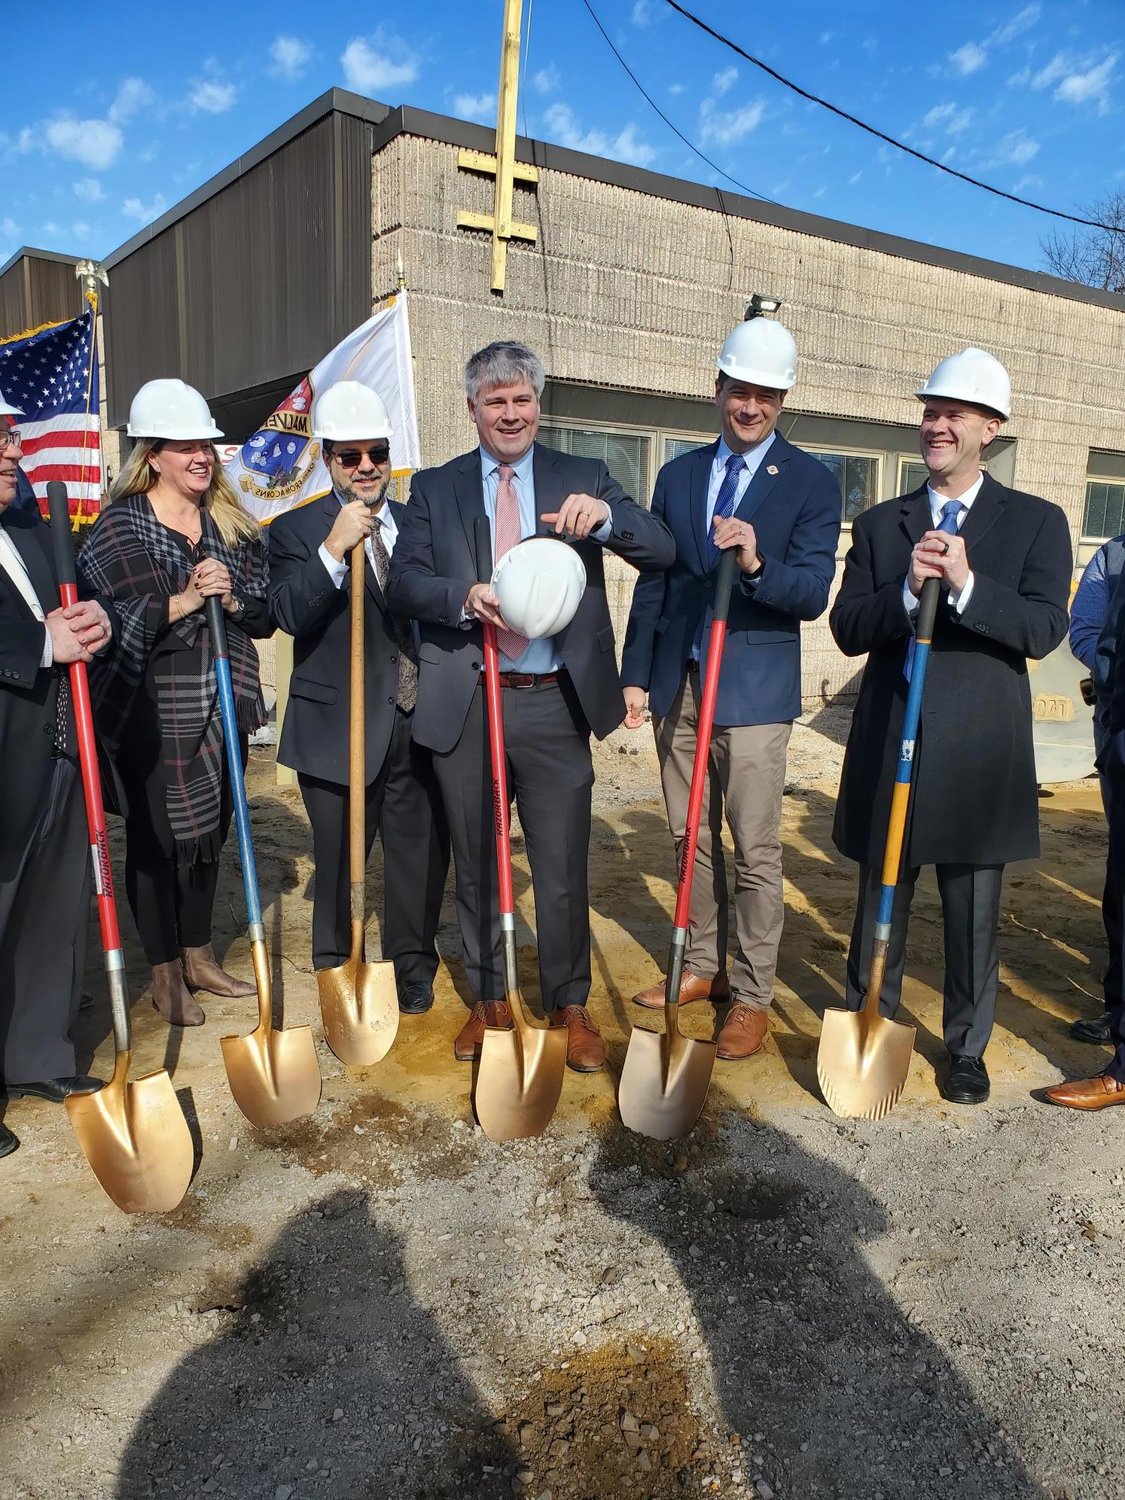 Mayor Keith Corbett, center, with village trustees at the groundbreaking of the new Malverne Police Department headquarters, which will be completed in about a year.